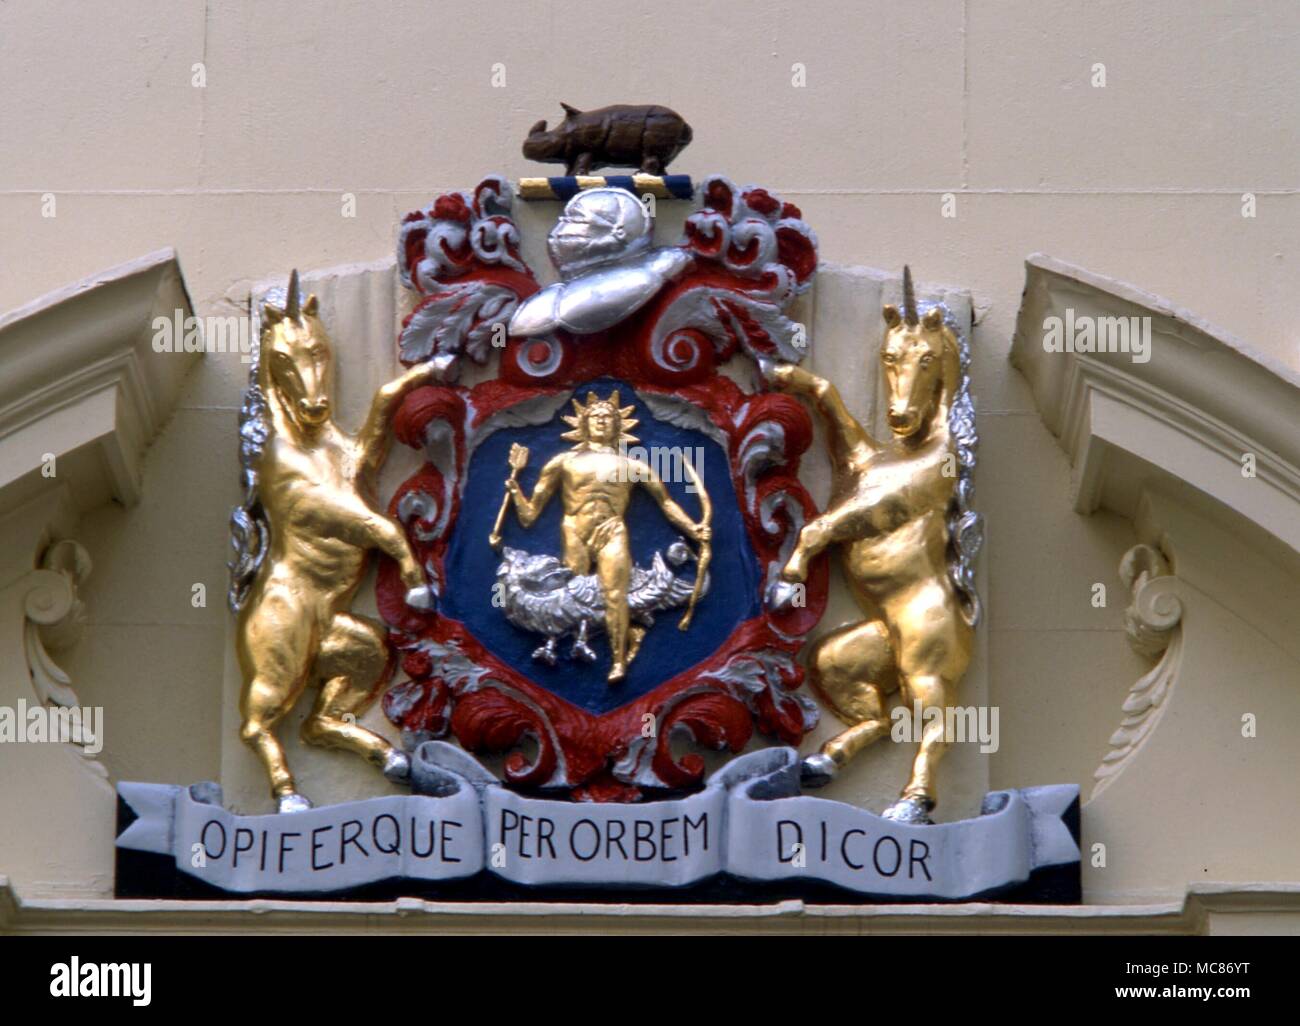 UNICORN Unicorn supporters for the coat of arms of the Worshipful Society of Apothecaries, London Stock Photo